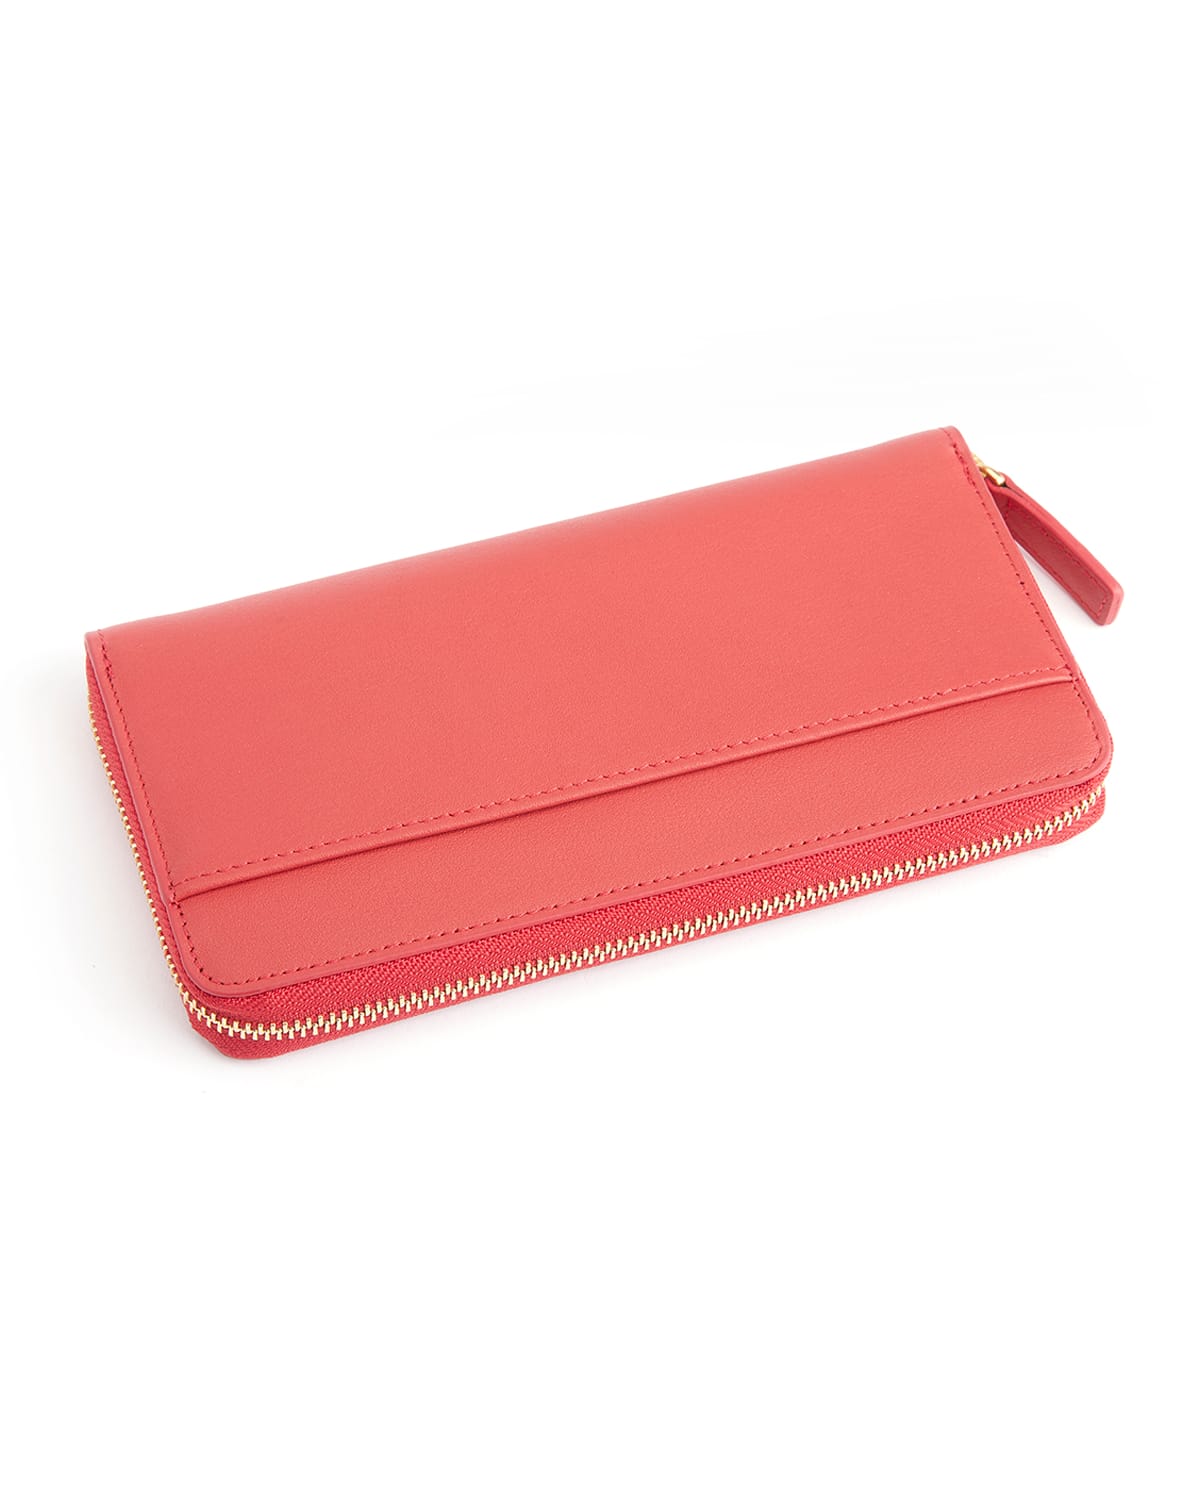 Royce New York Rfid Blocking Continental Wallet, Personalized In Red